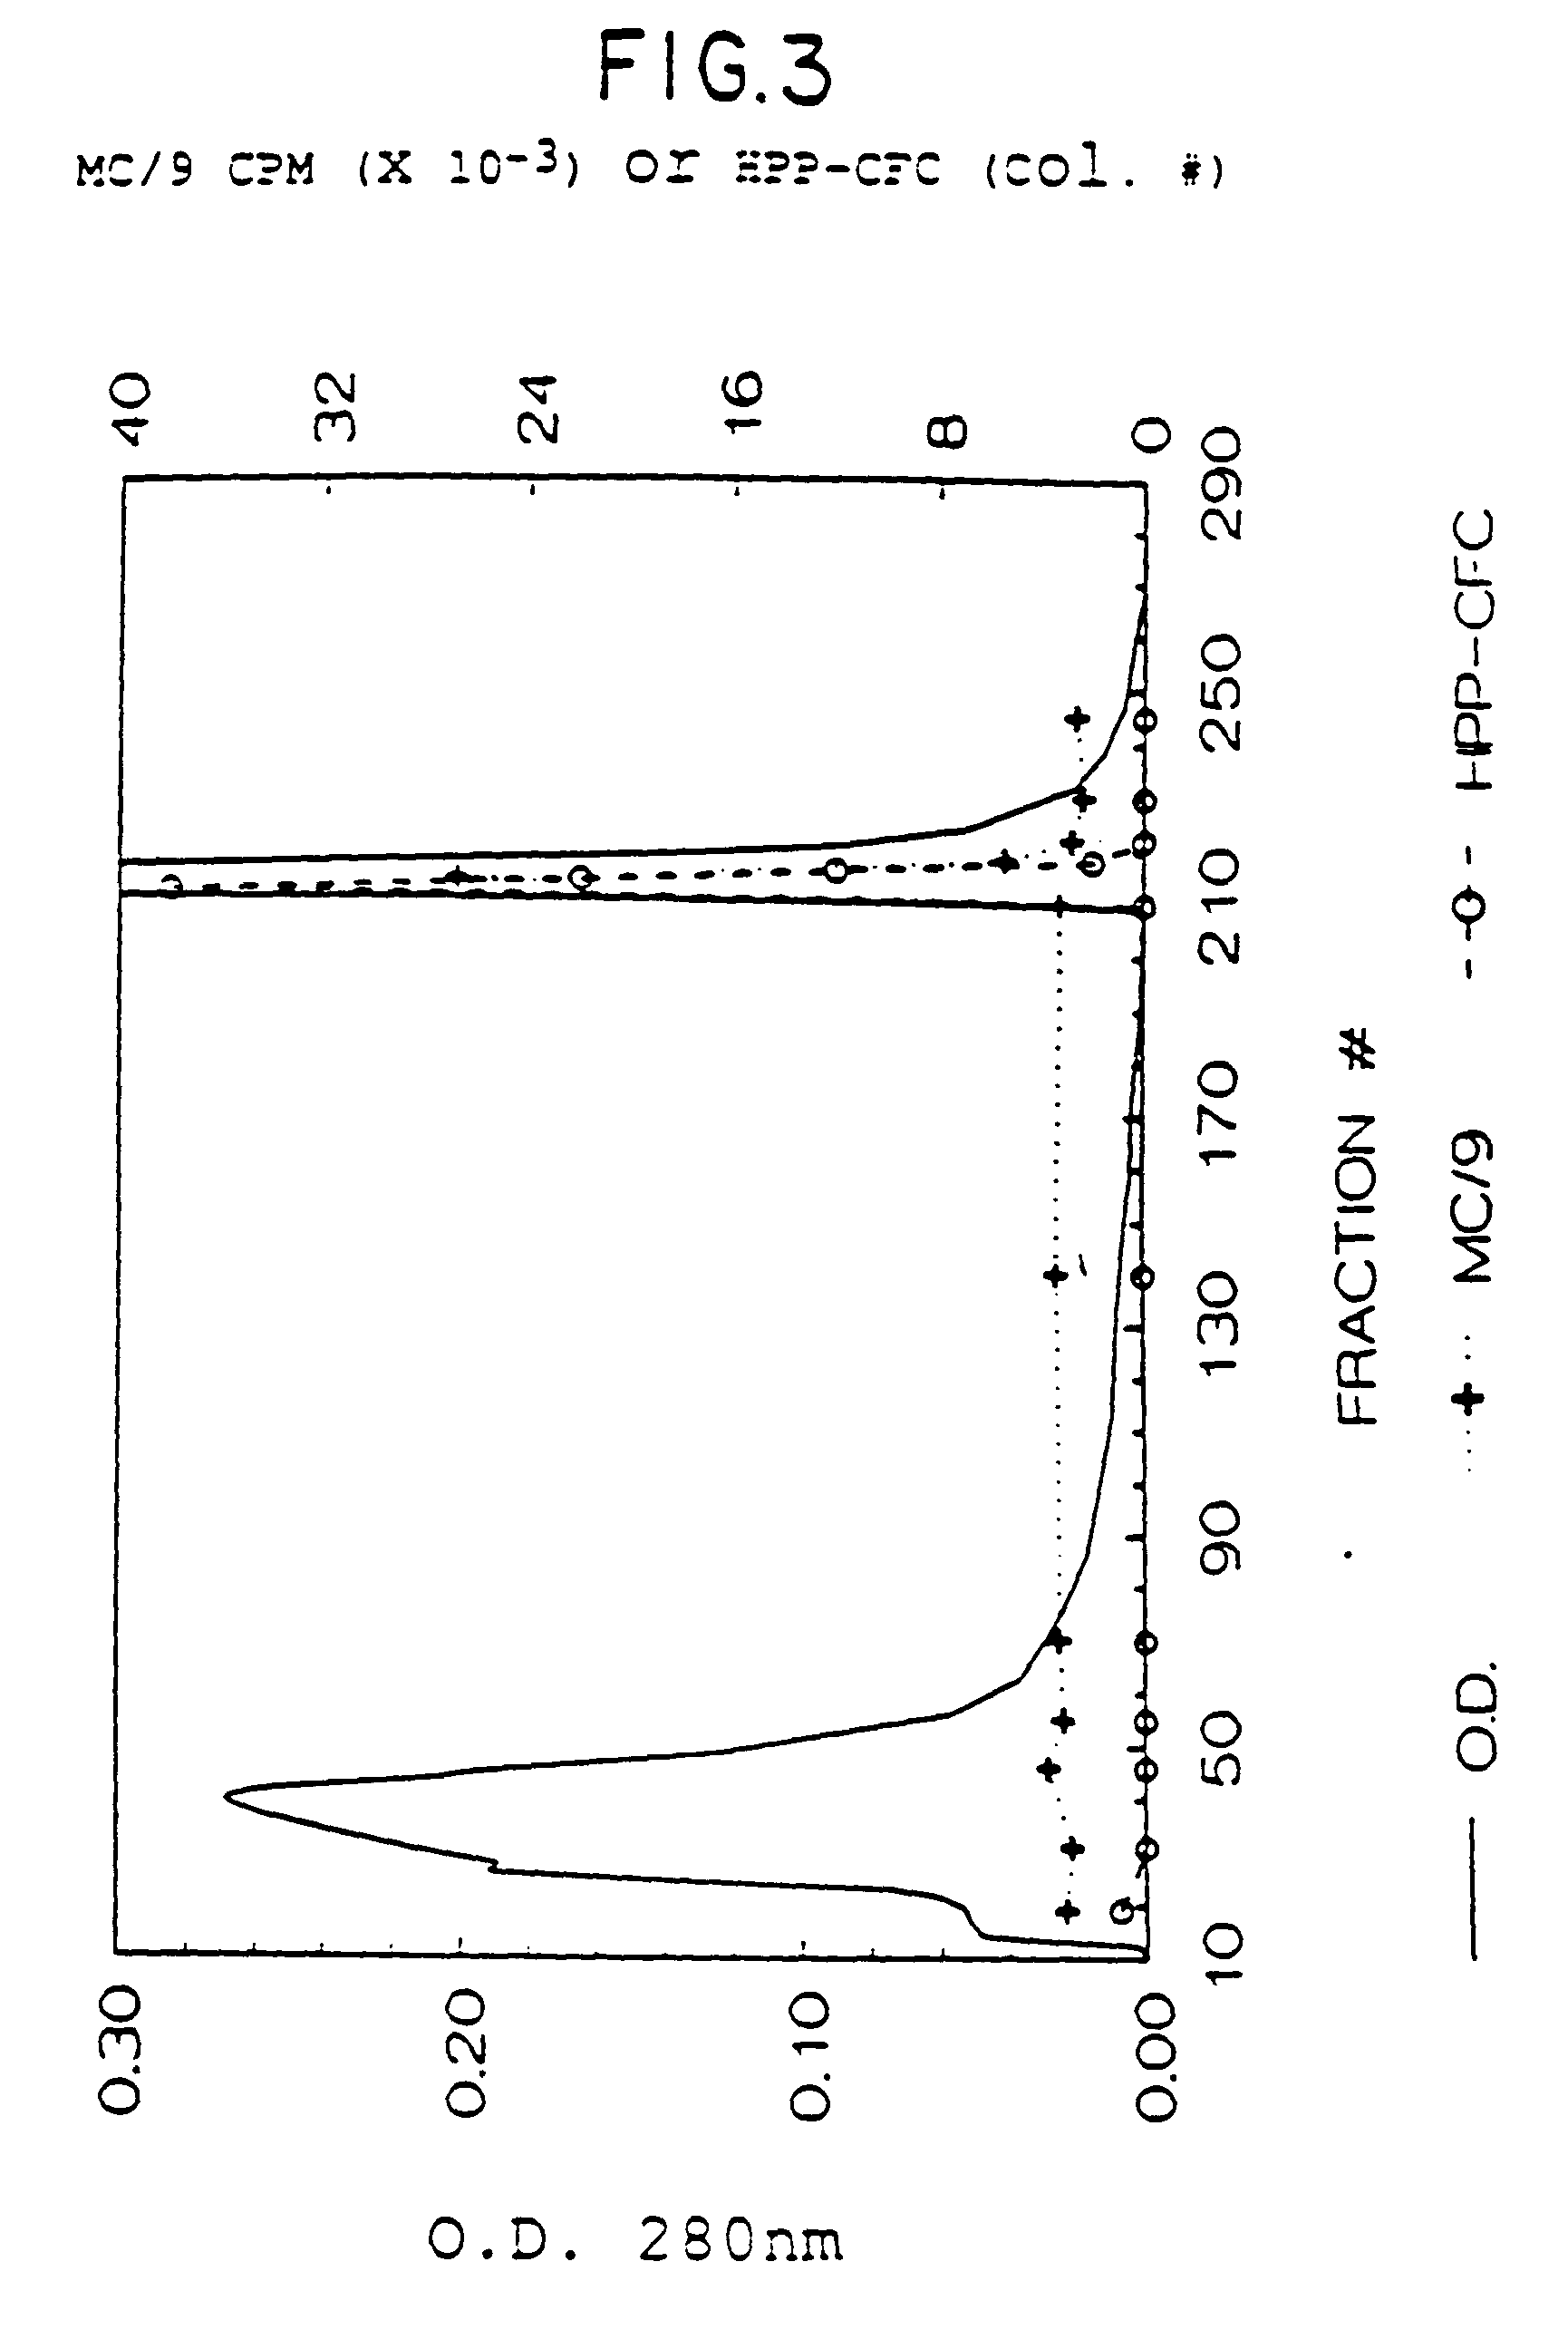 SCF antibody compositions and methods of using the same